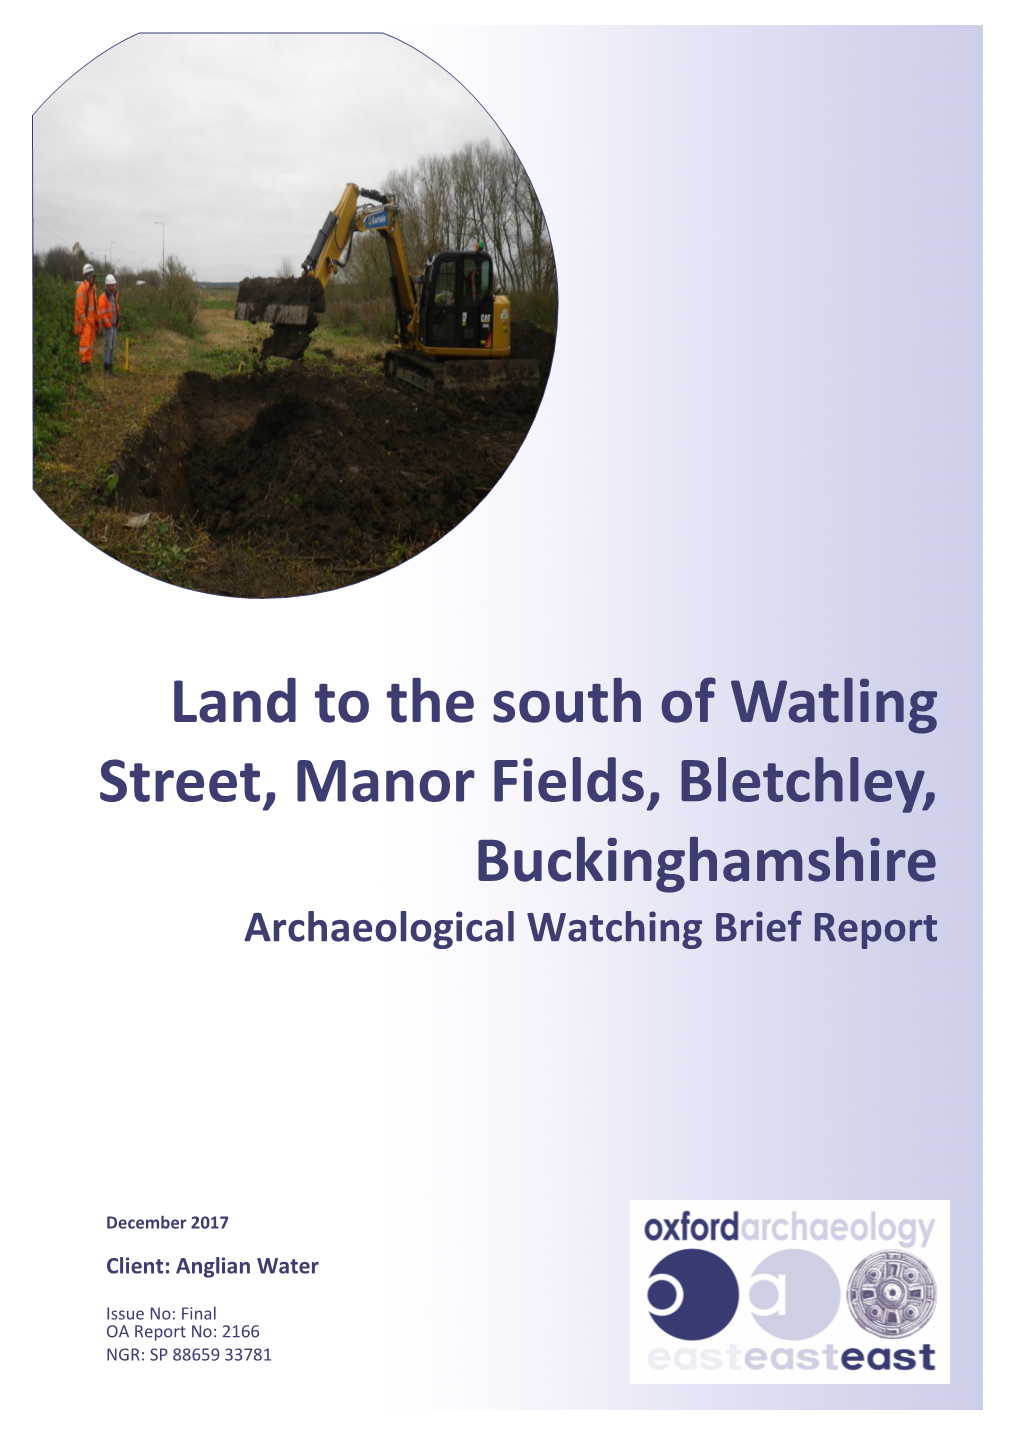 Land to the South of Watling Street, Manor Fields, Bletchley, Buckinghamshire Final